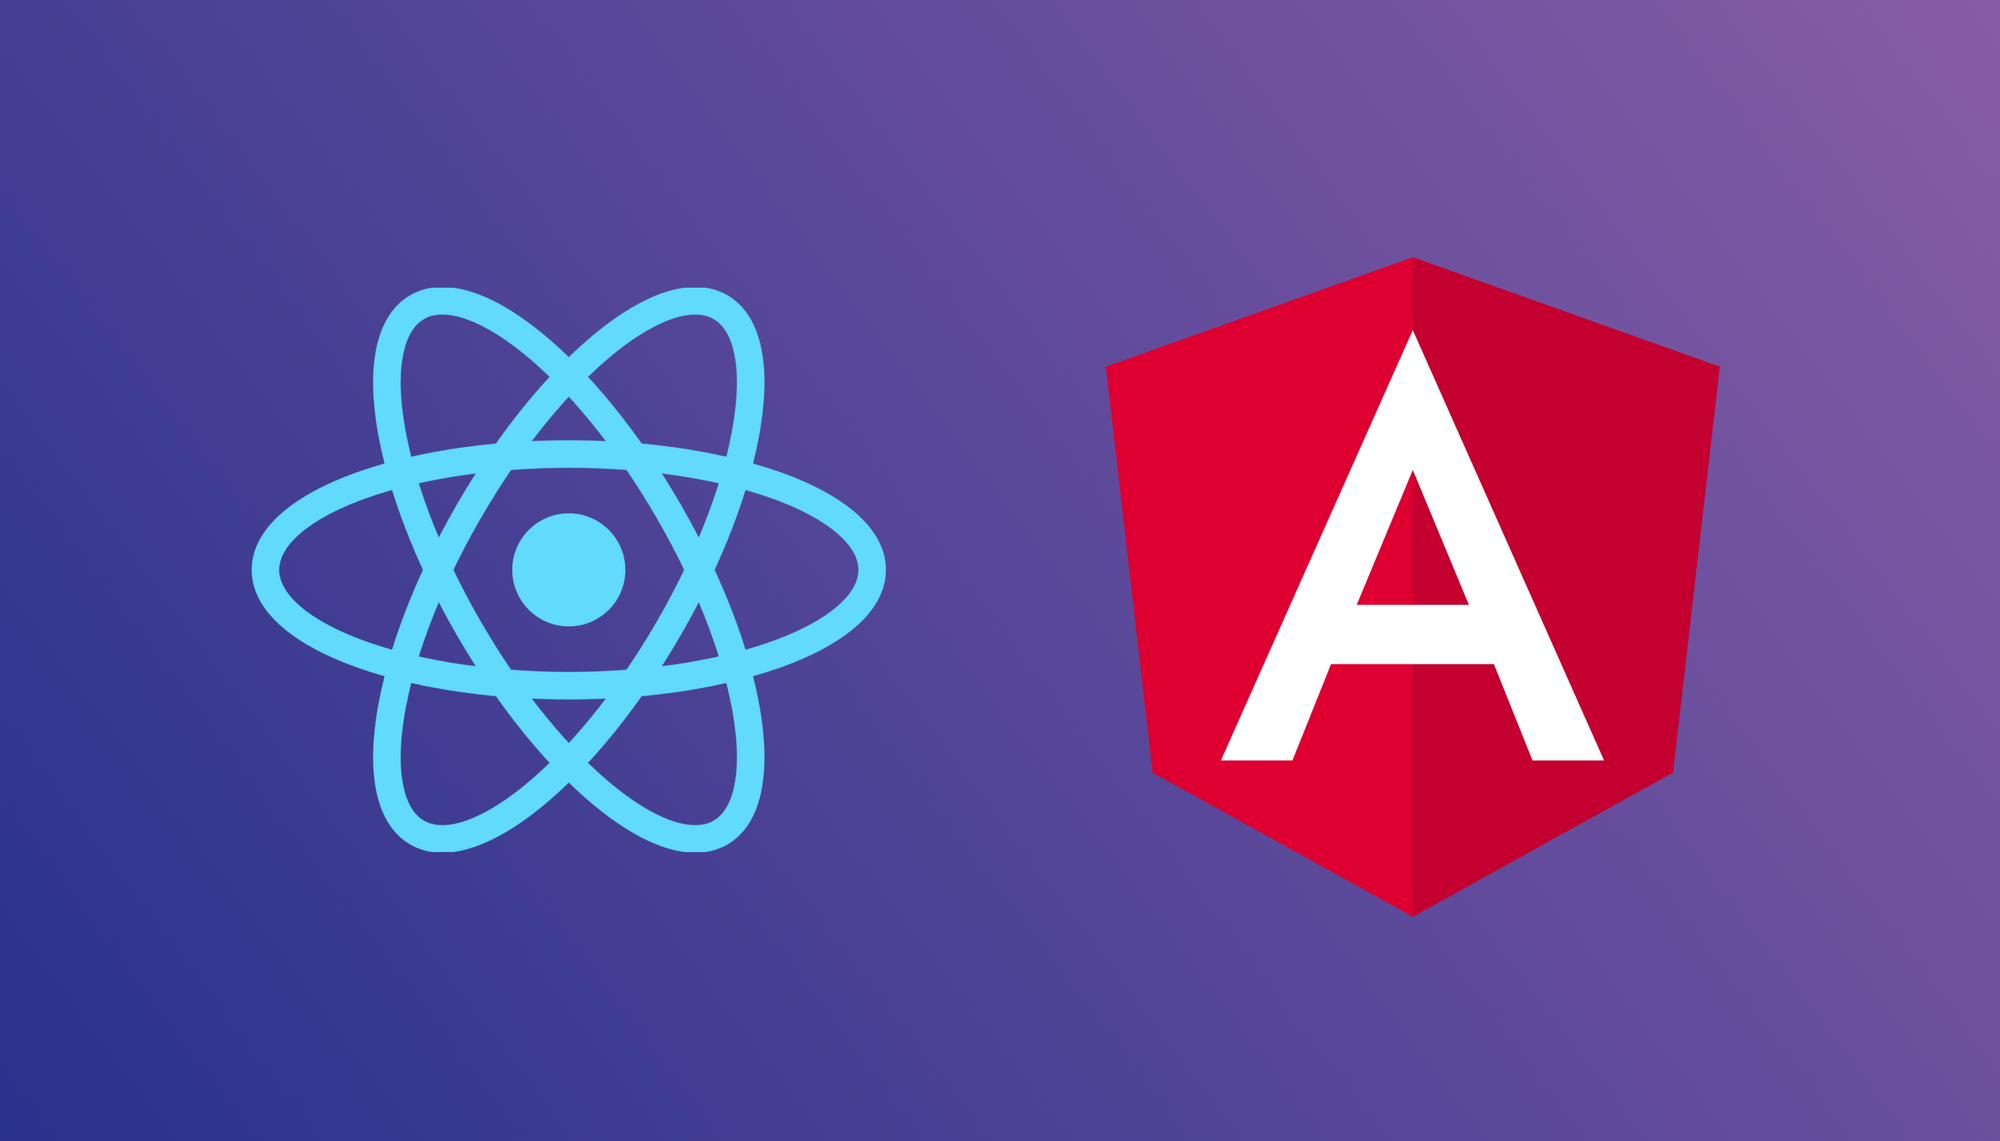 React vs Angular: Which is better?